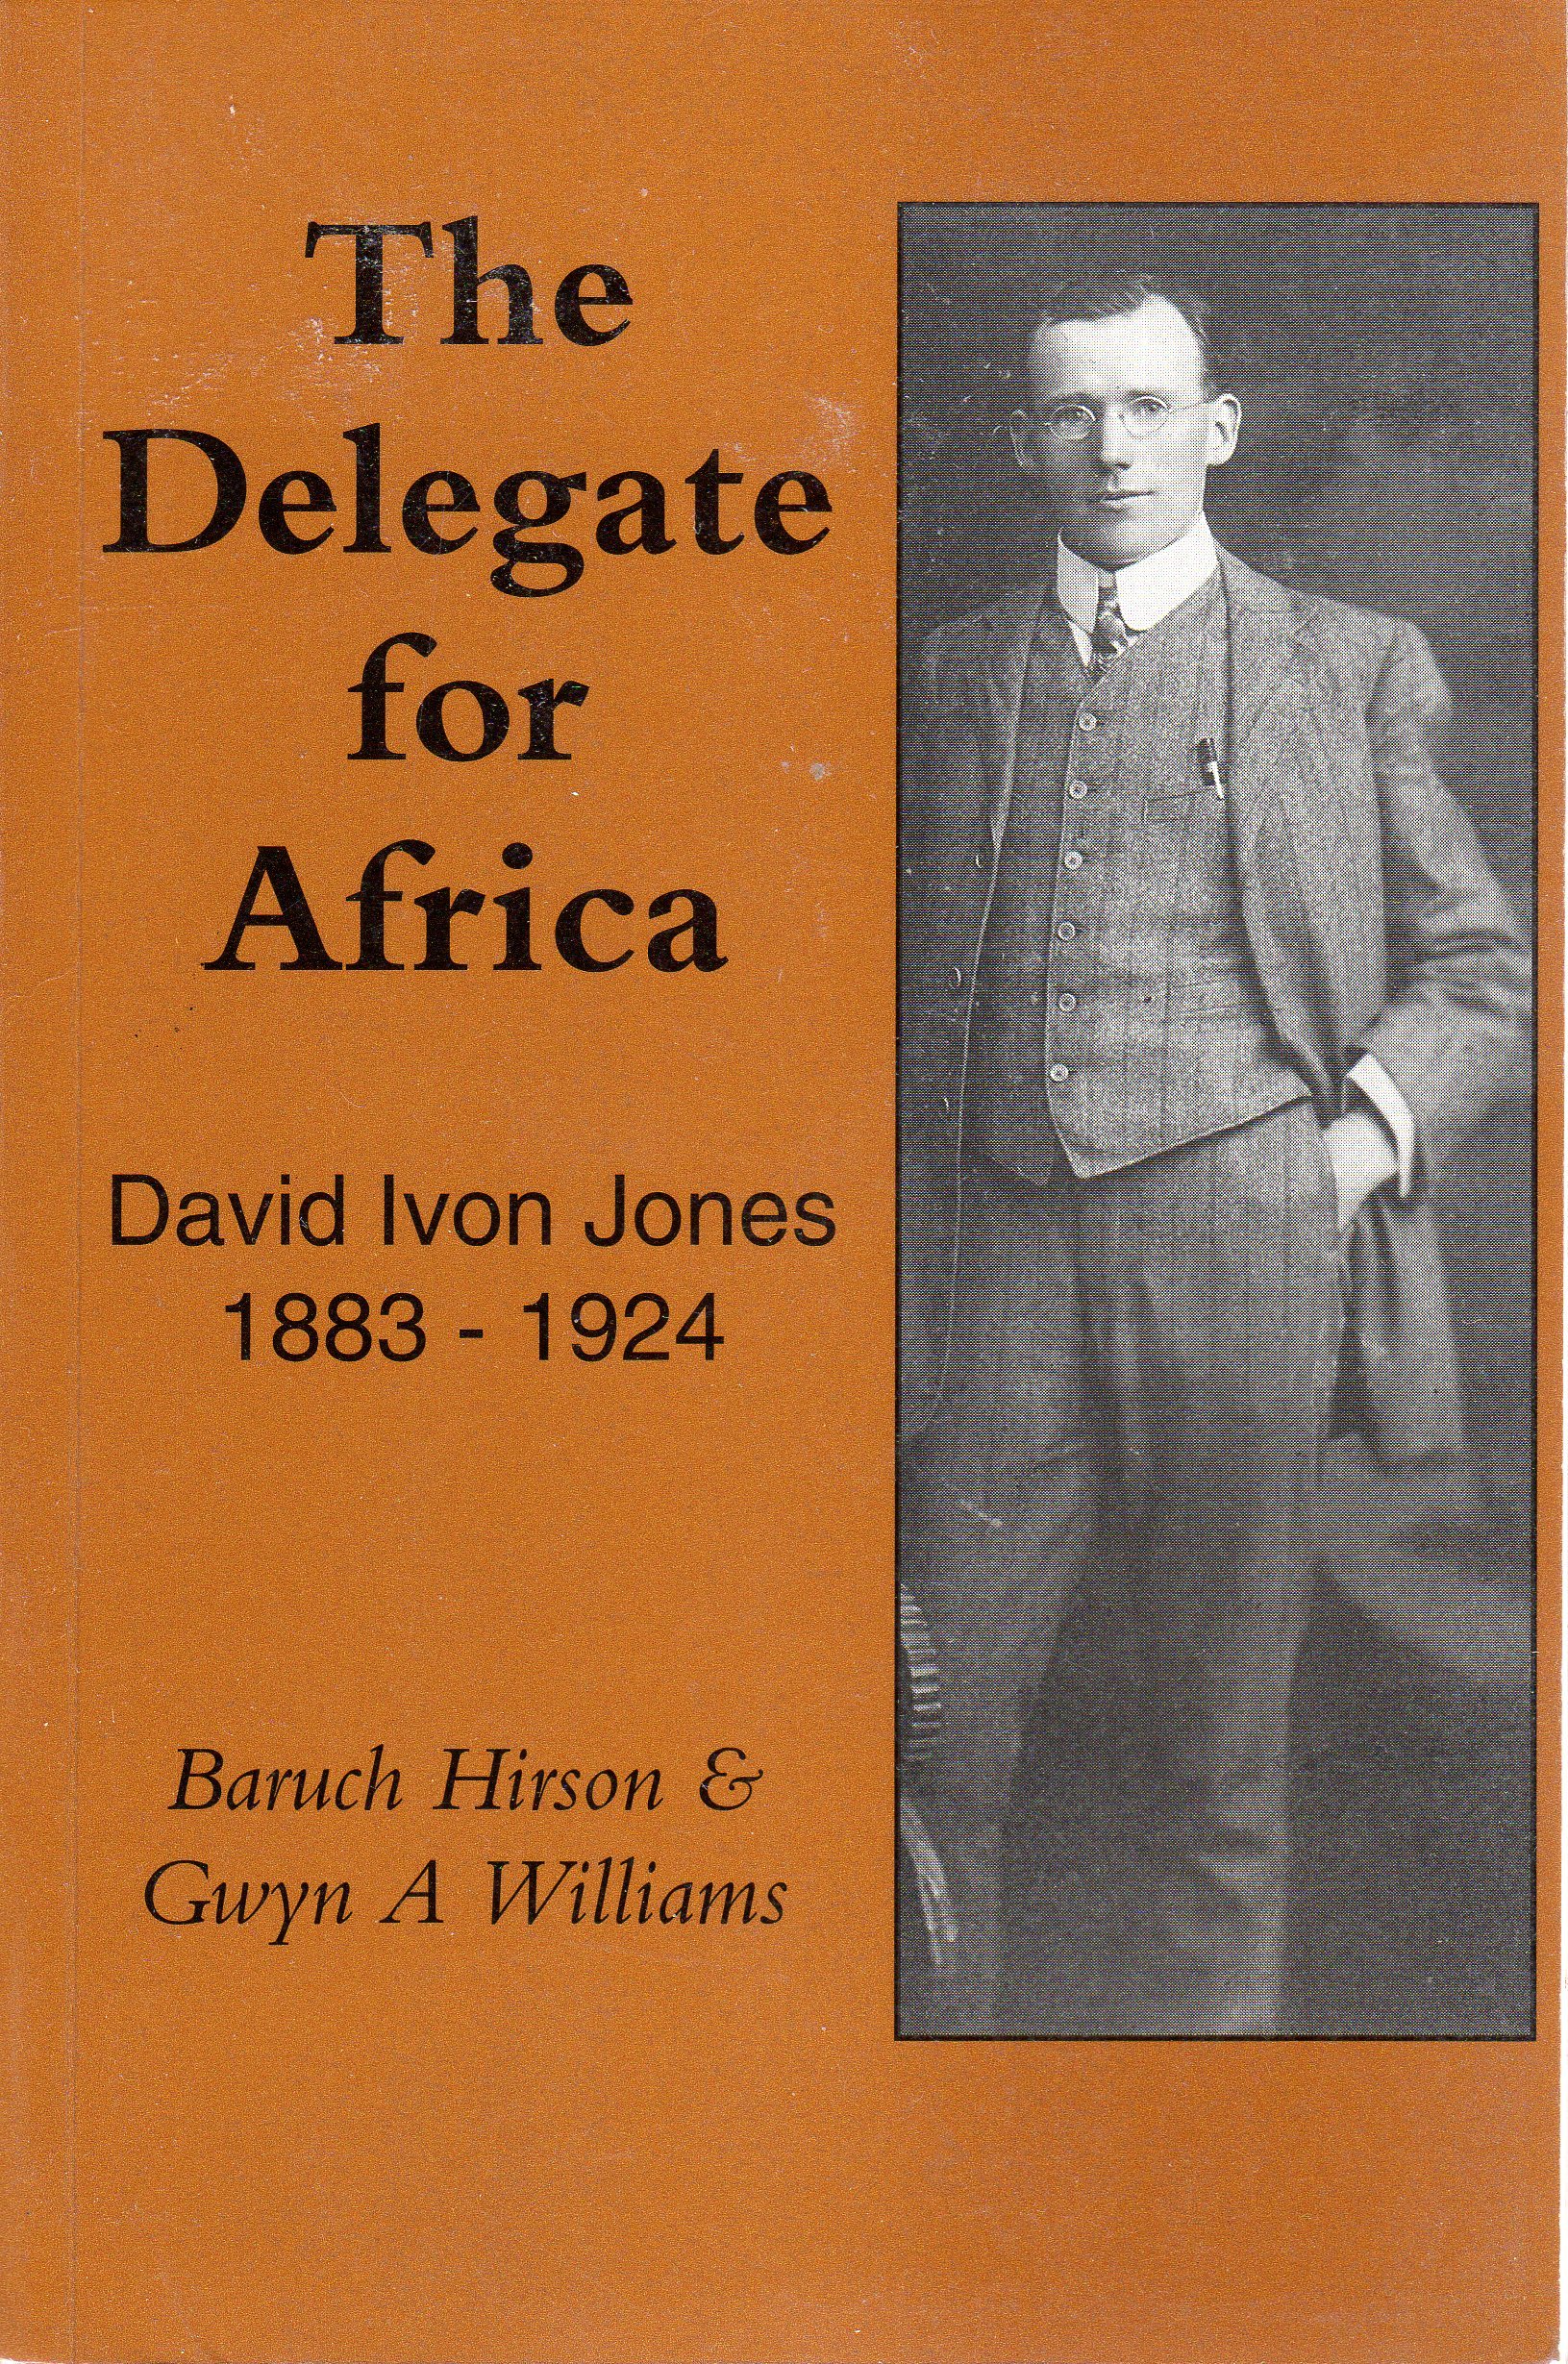 The Delegate for Africa